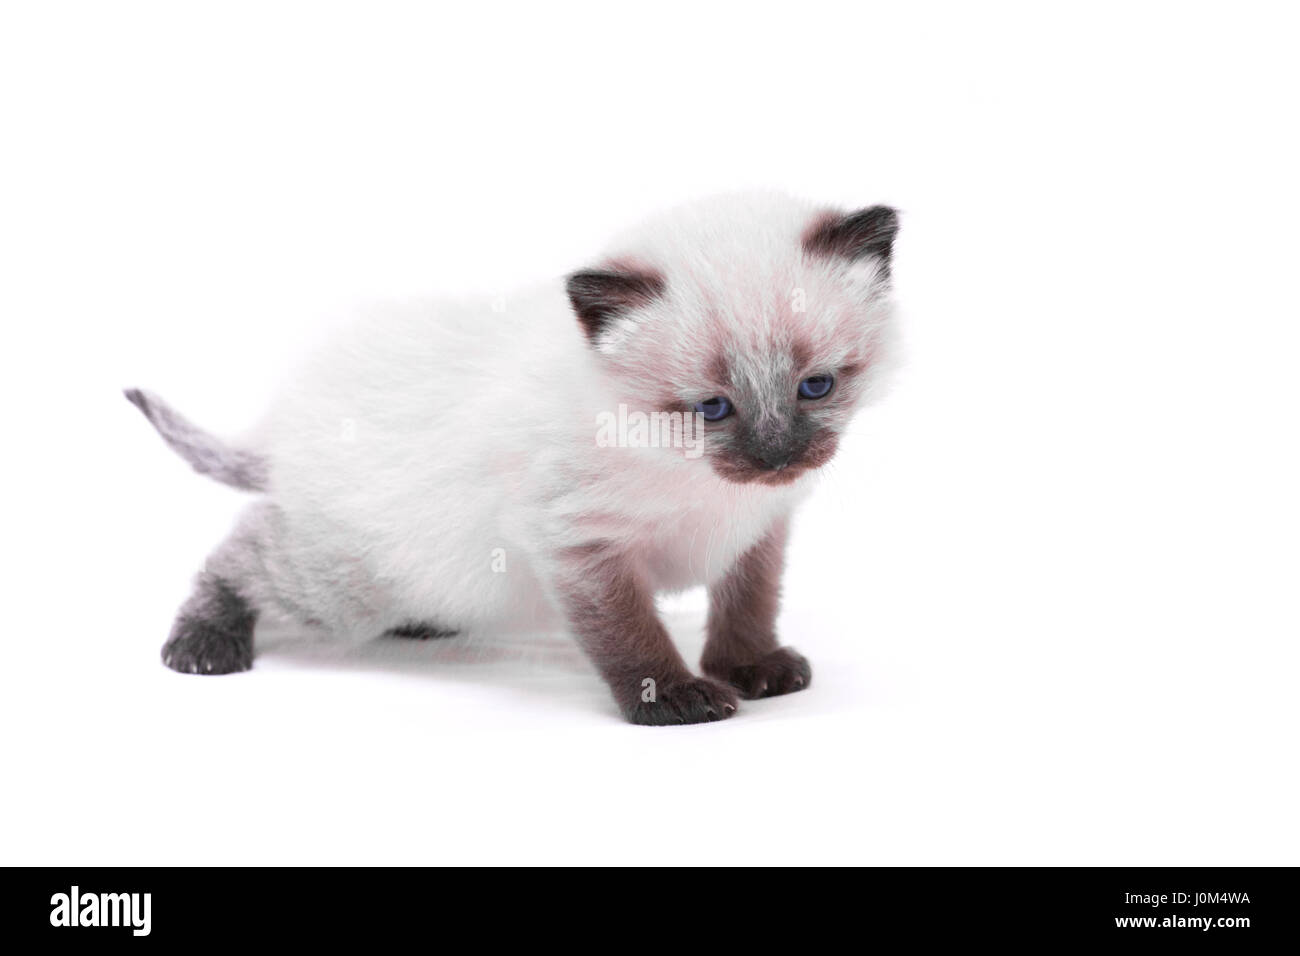 Siamese kitten with blue eyes looks down on white background. Isolated on white background. Stock Photo